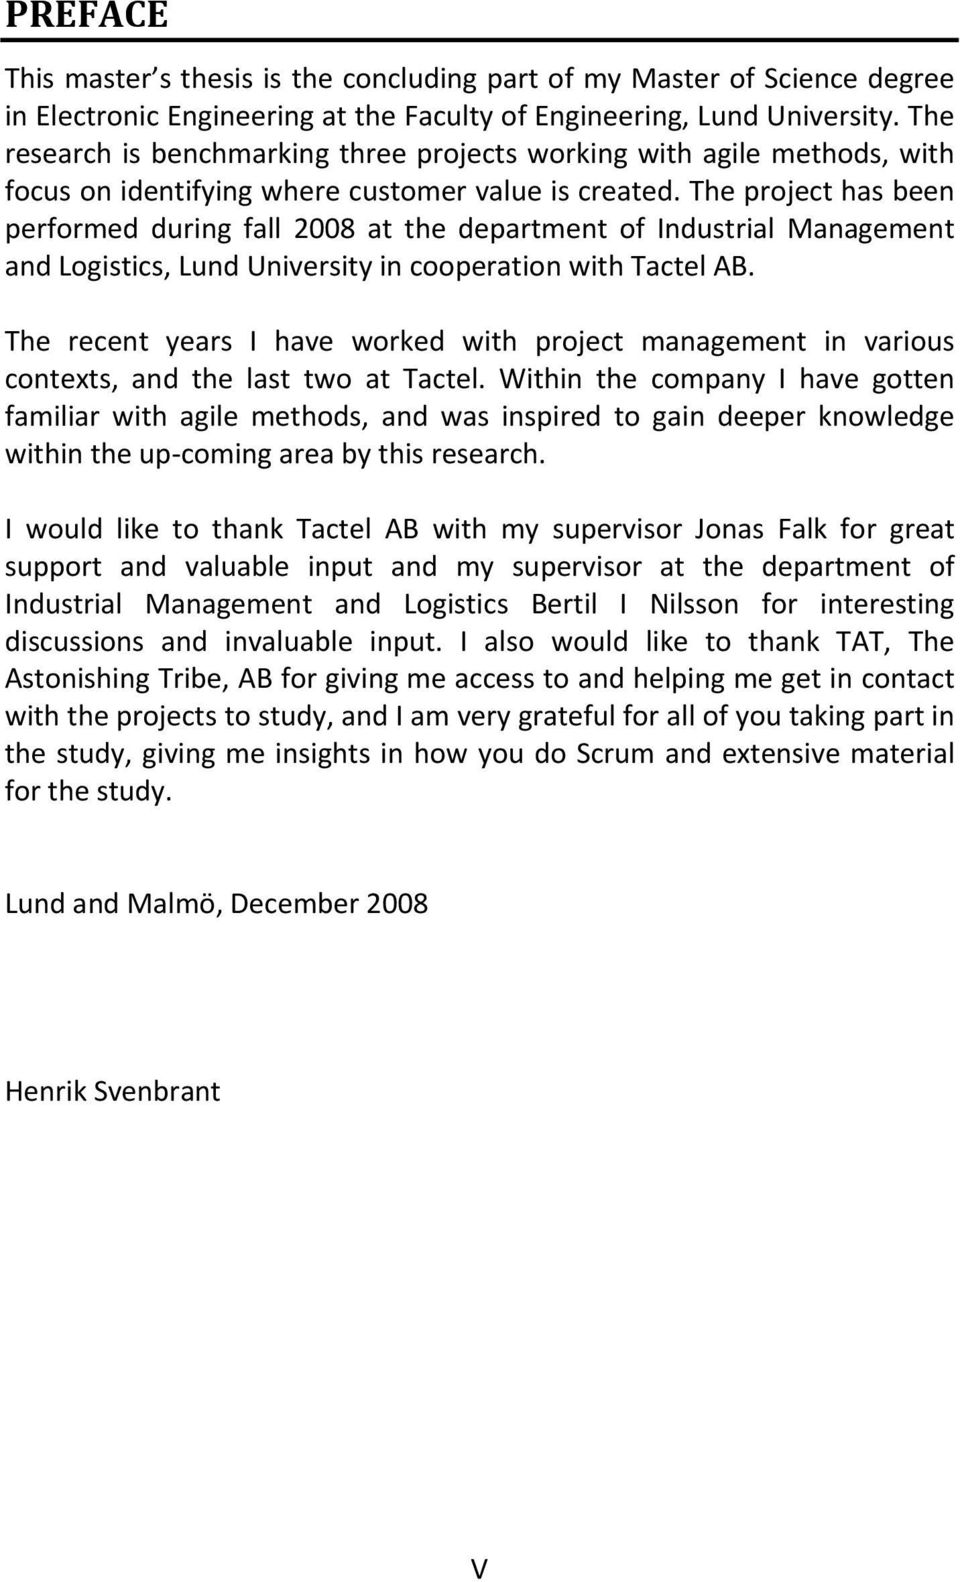 The project has been performed during fall 2008 at the department of Industrial Management and Logistics, Lund University in cooperation with Tactel AB.